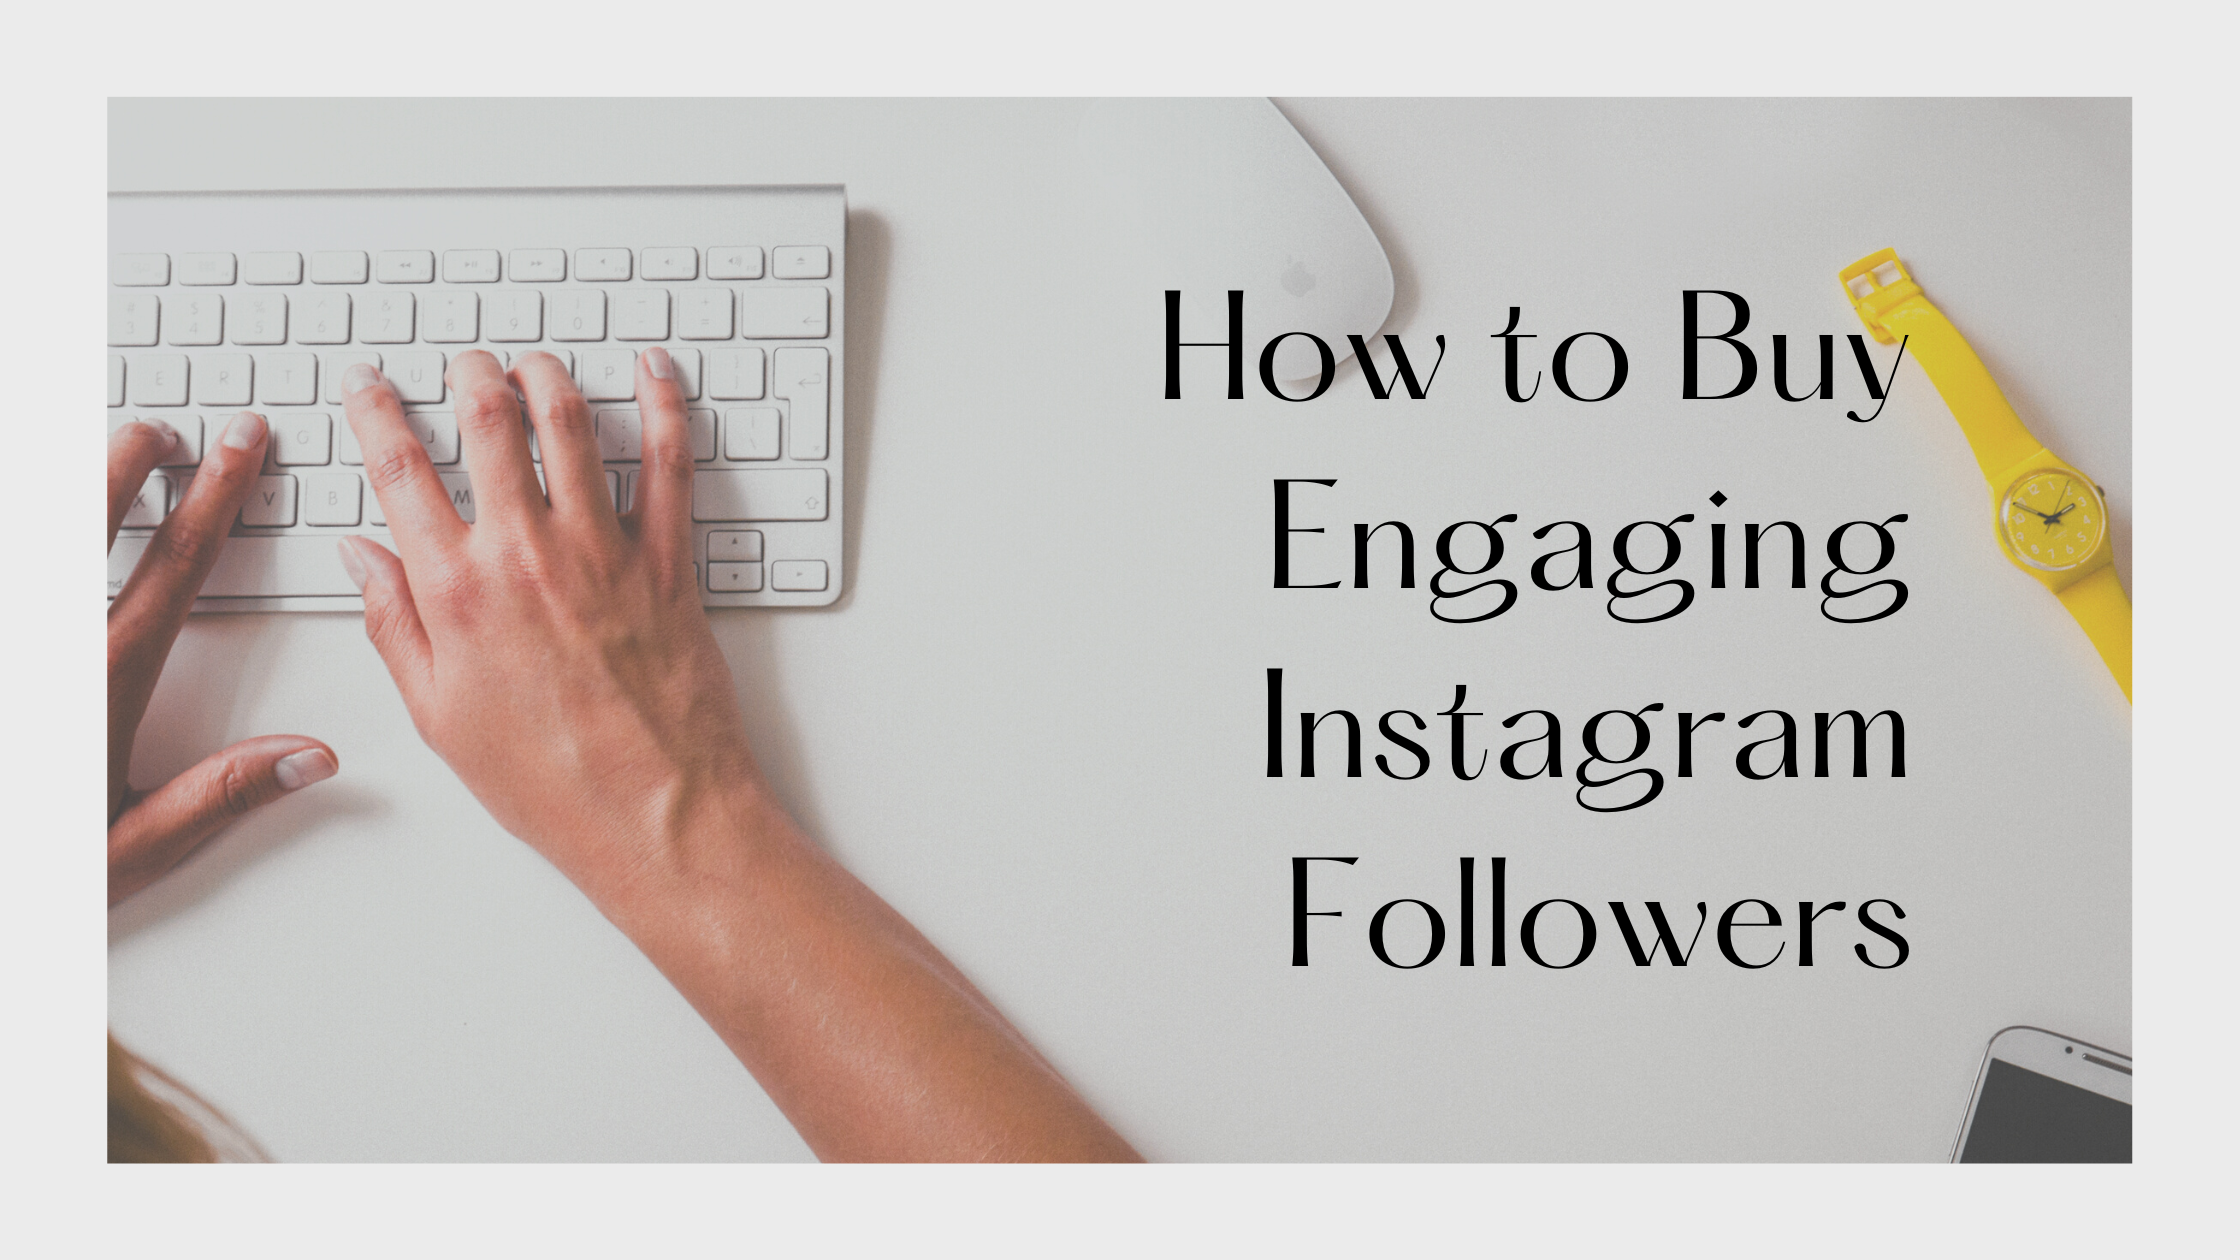 How to Buy Engaging Instagram Followers